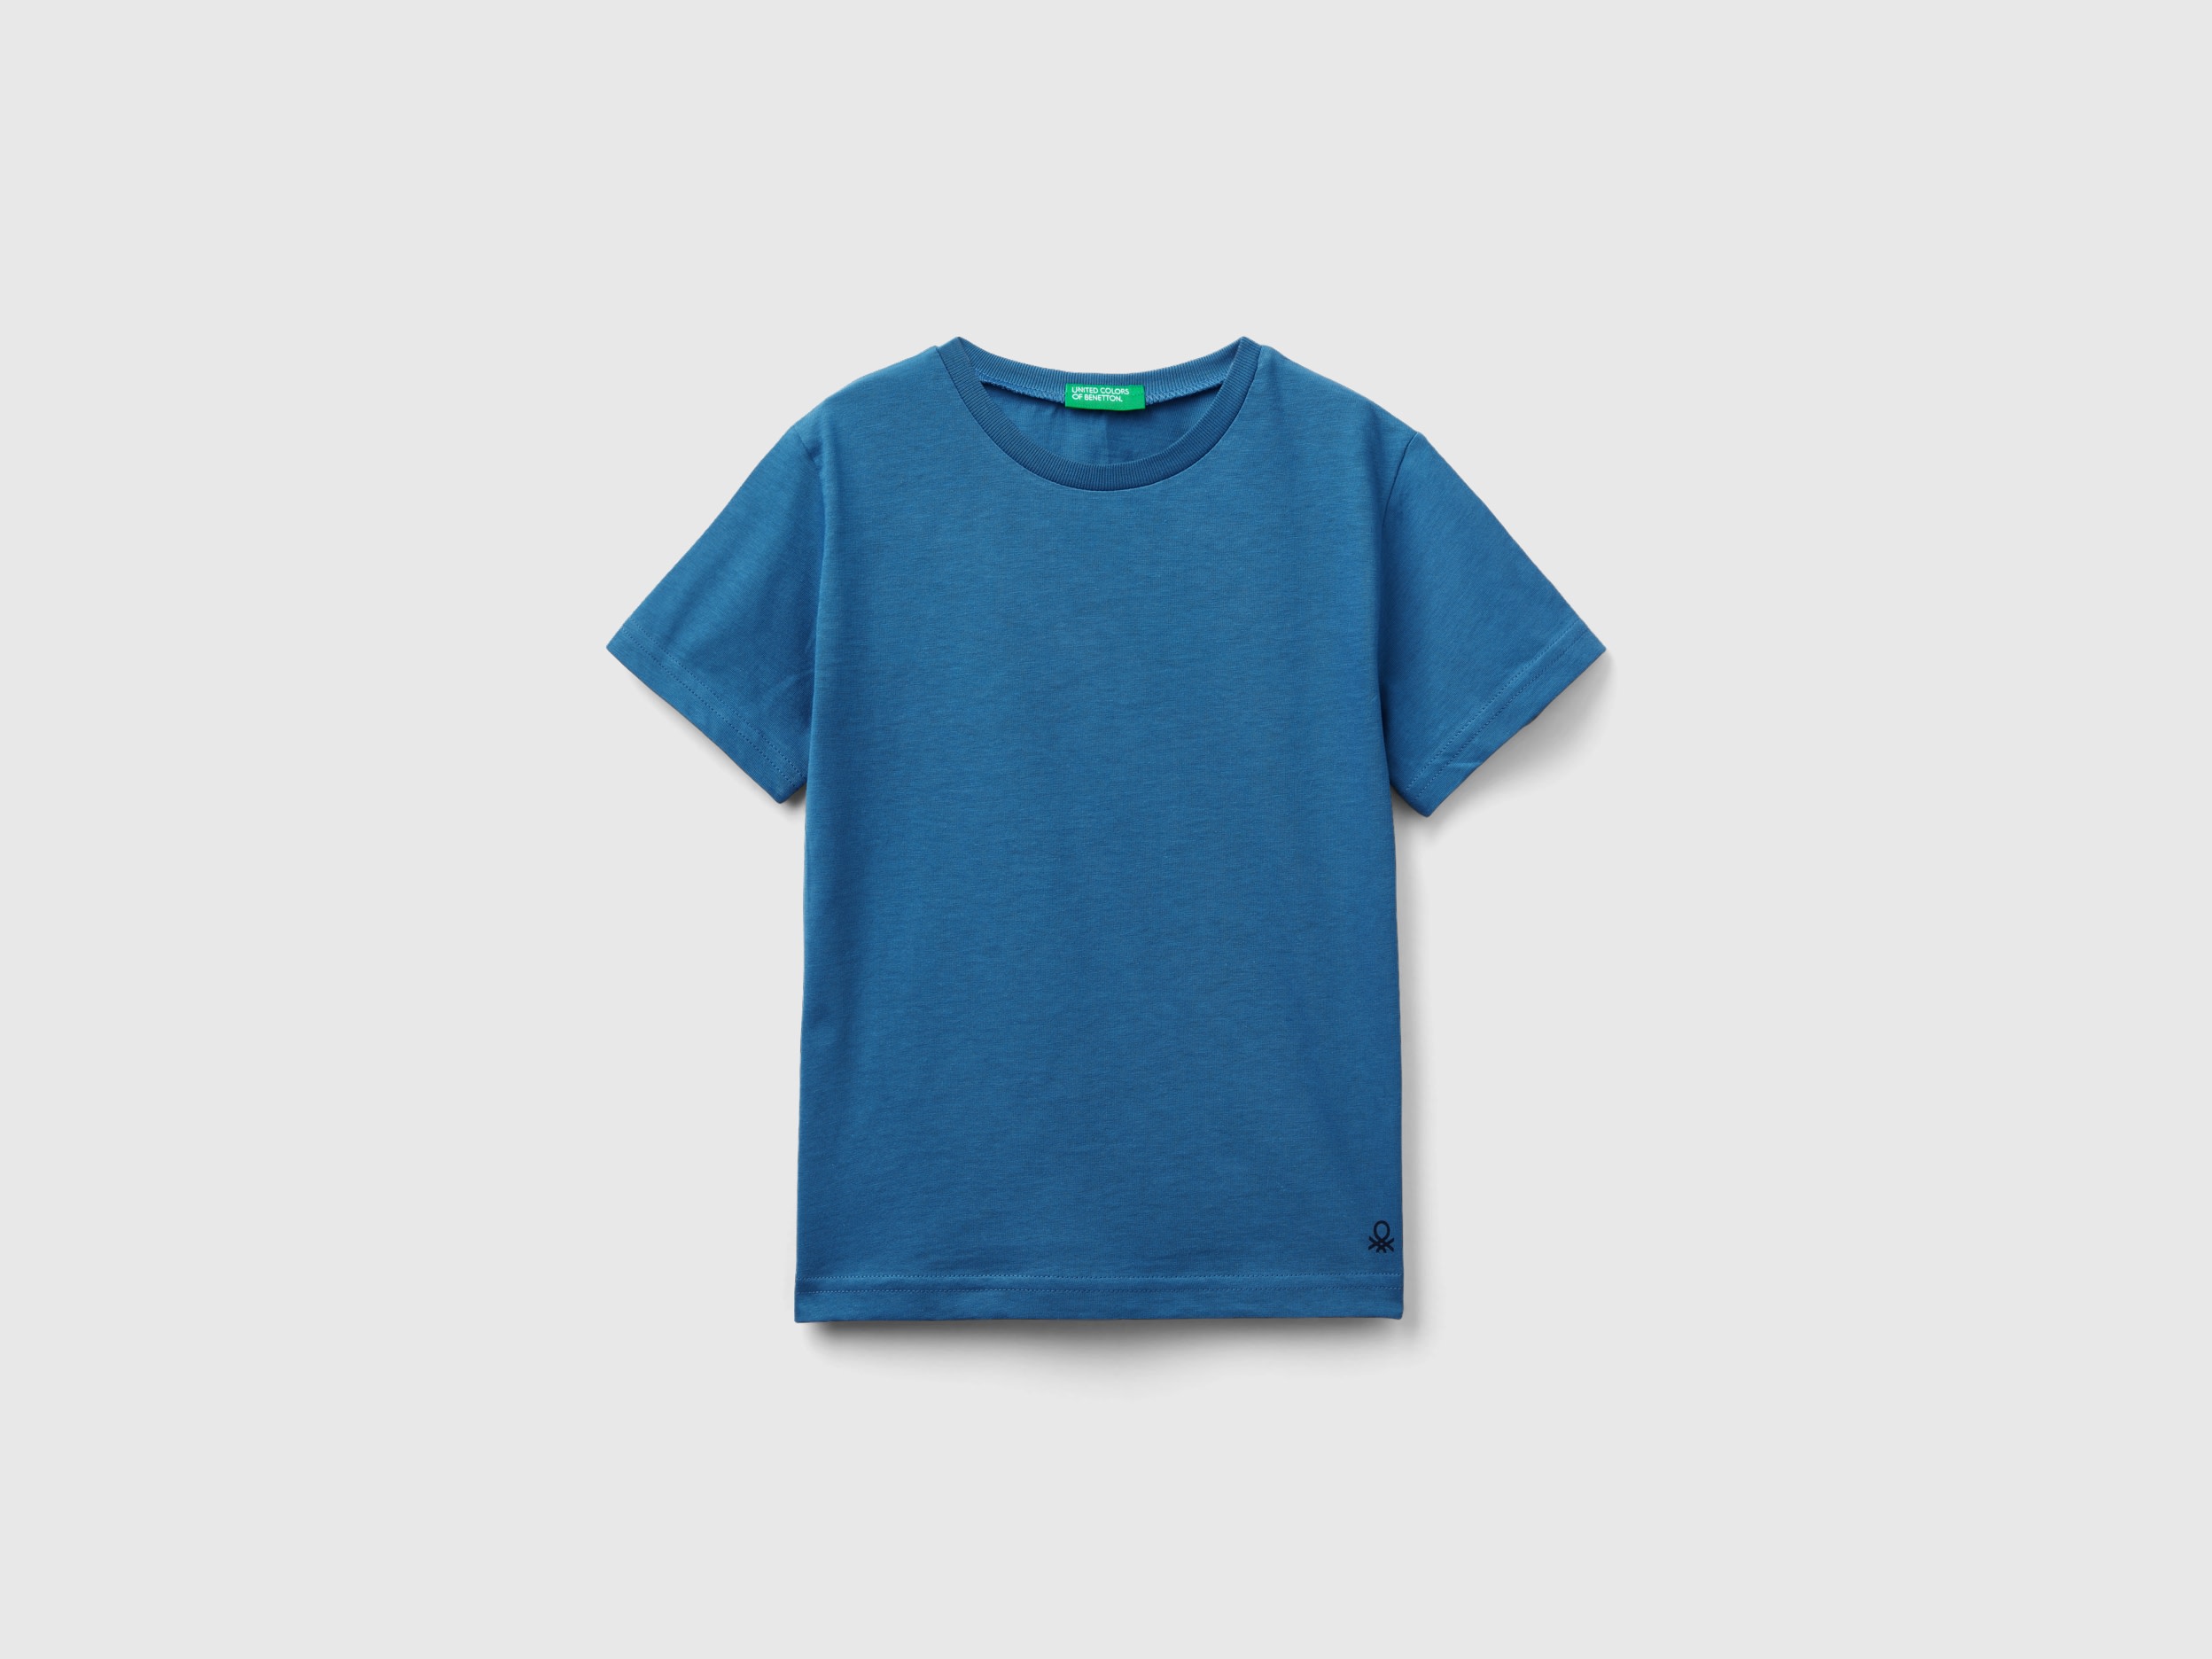 Image of Benetton, T-shirt In Organic Cotton, size 116, Blue, Kids